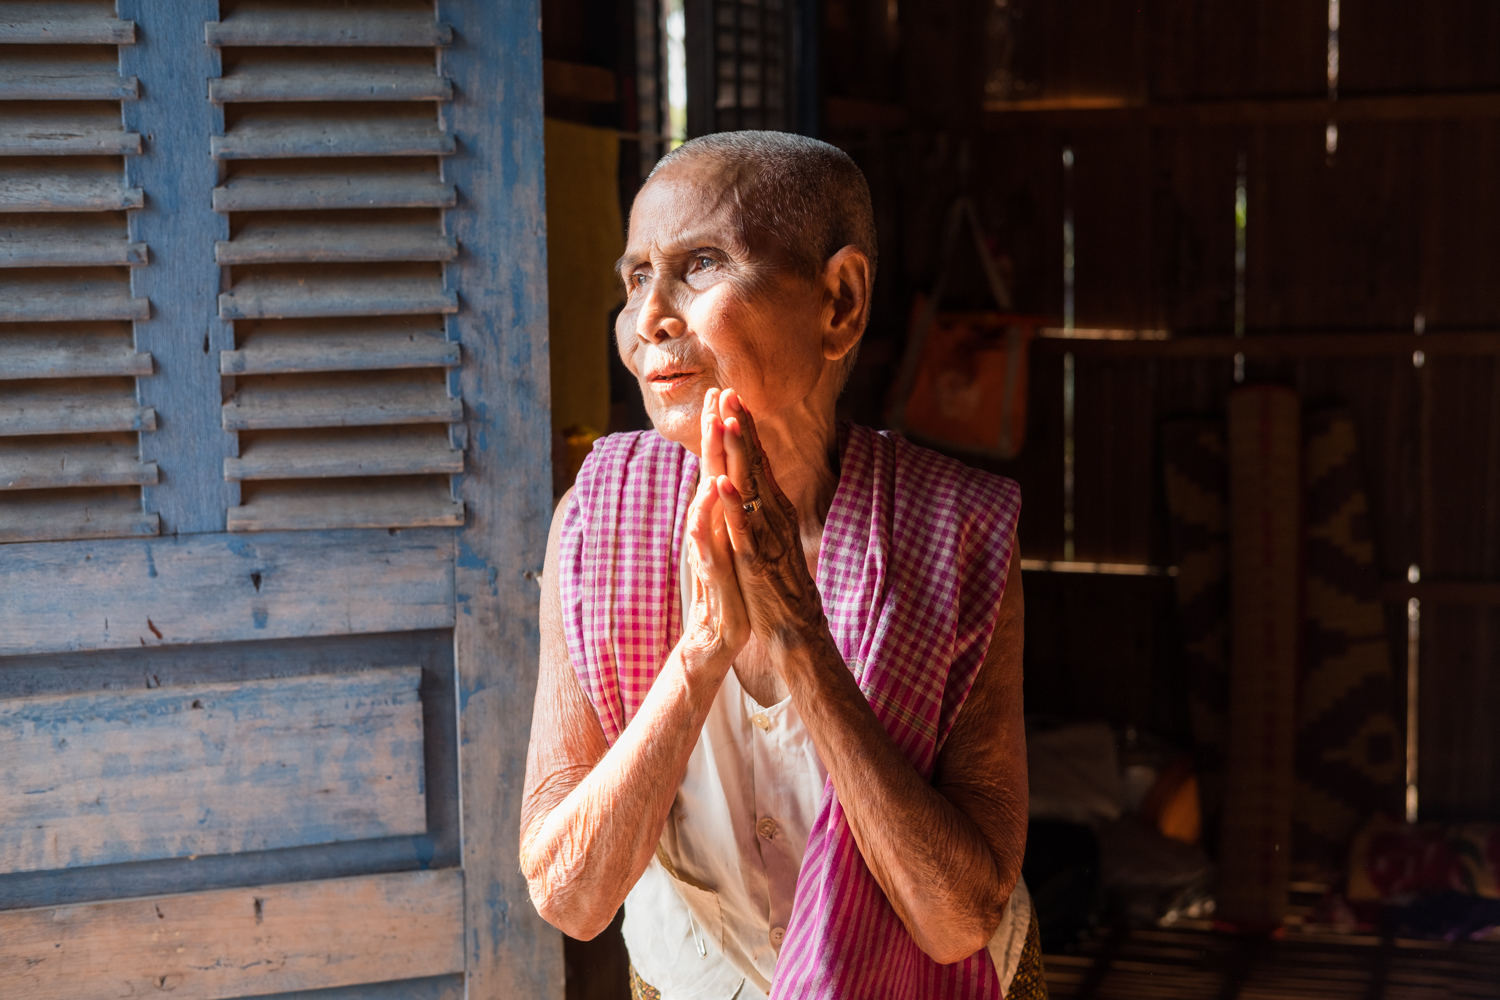  A local Cambodian woman in the village of Angkor Ban pauses for a moment of reflection in her home's doorway. 